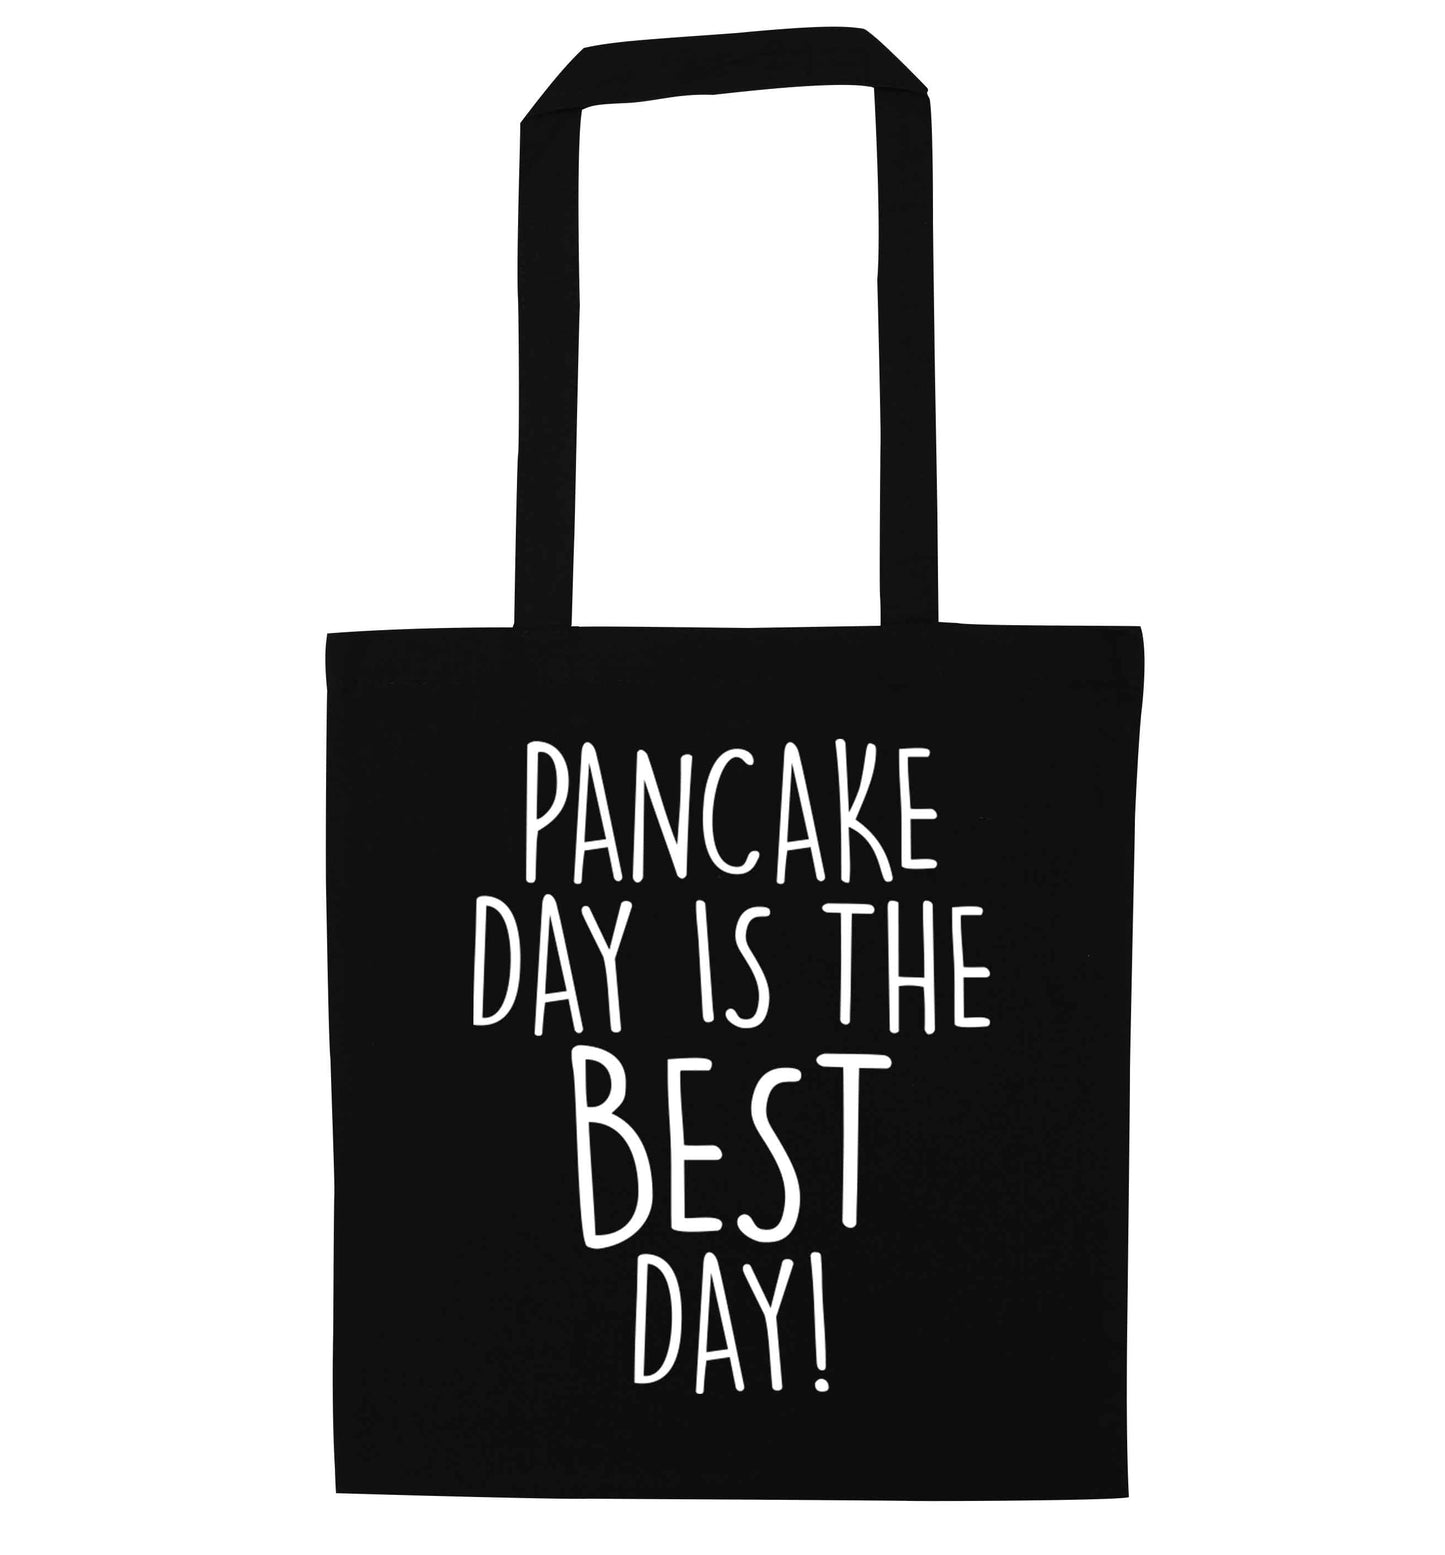 Pancake day is the best day black tote bag